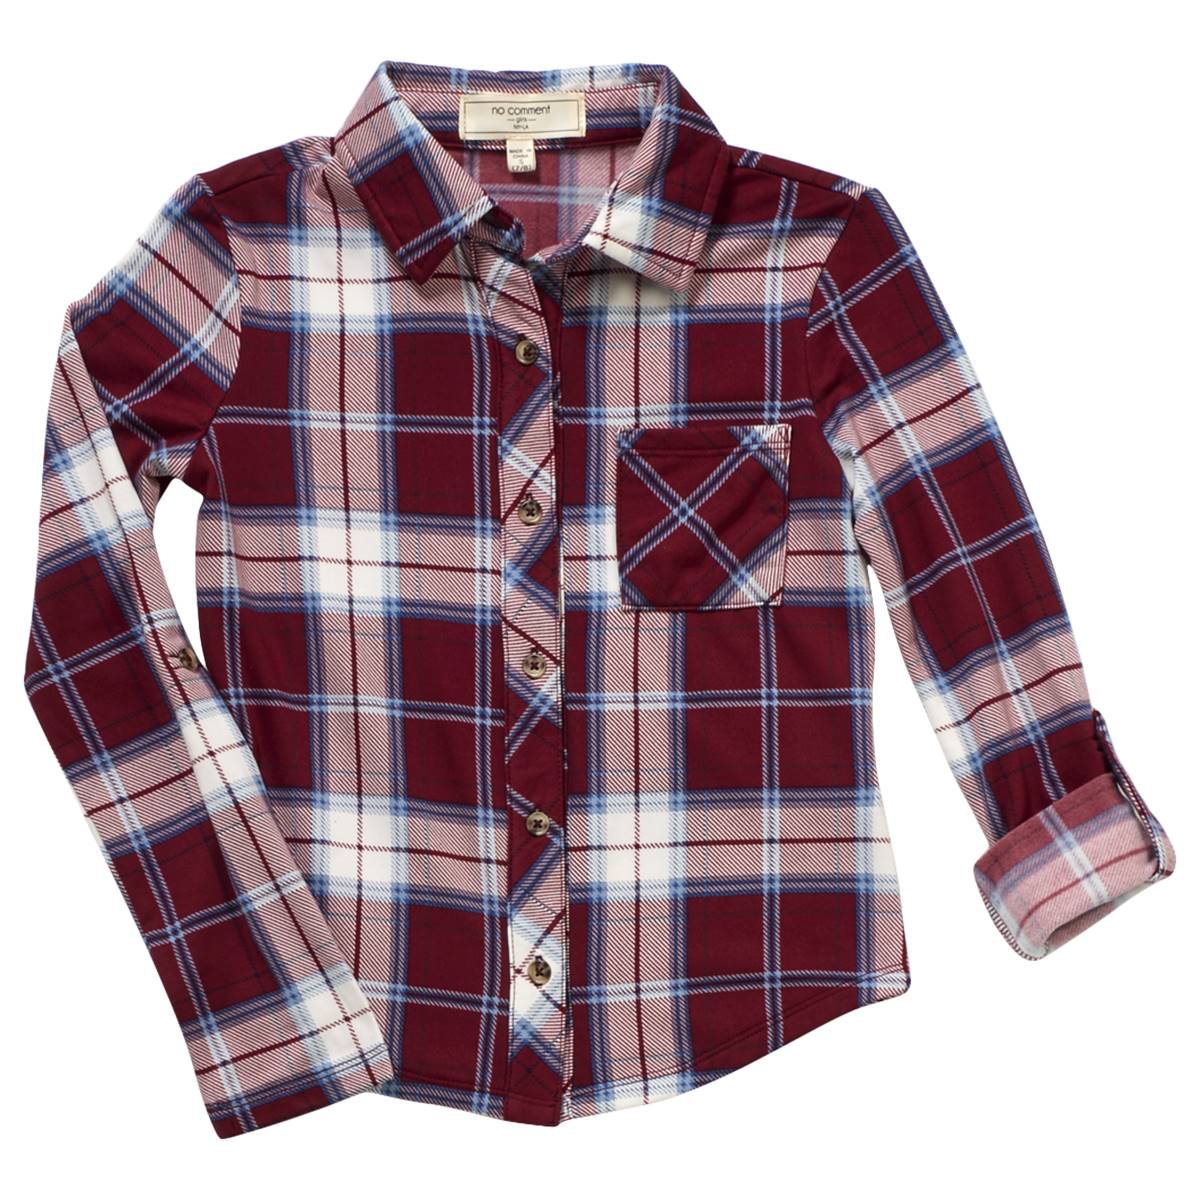 Girls (7-16) No Comment Fleece Back Yummy Shirt - Roy Plaid Red